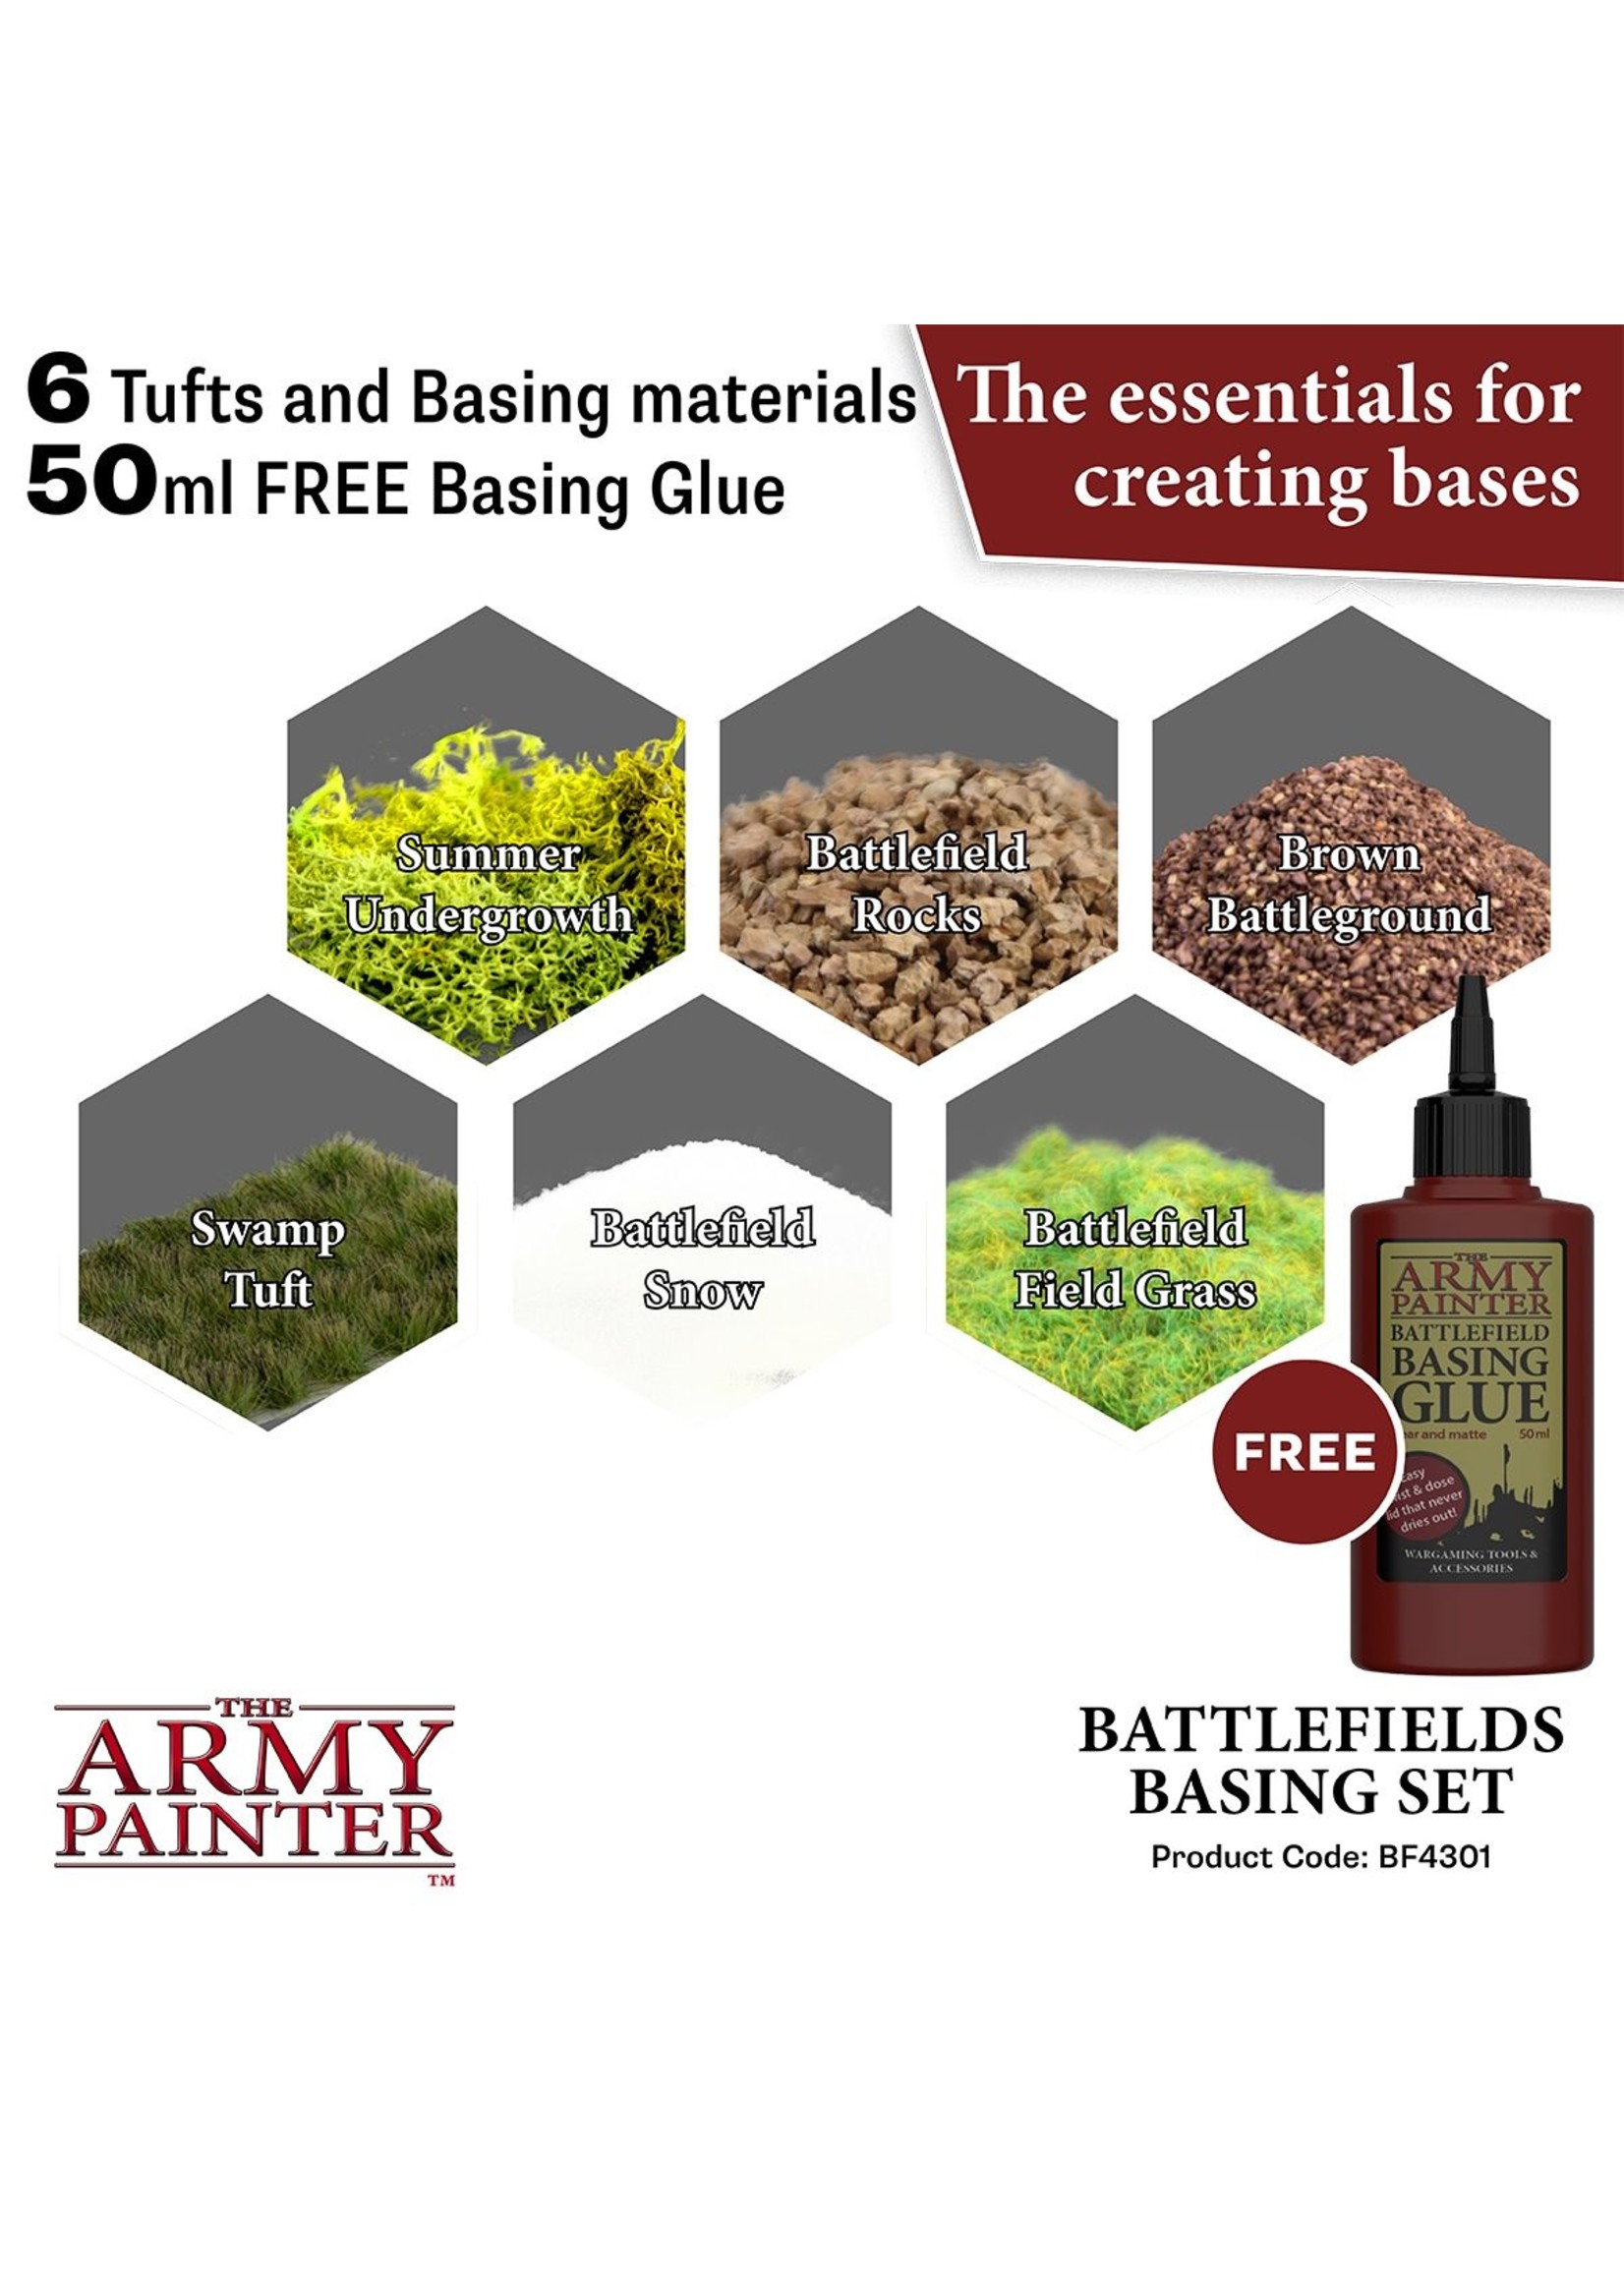 The Army Painter BF4301 - Battlefields Basing Set